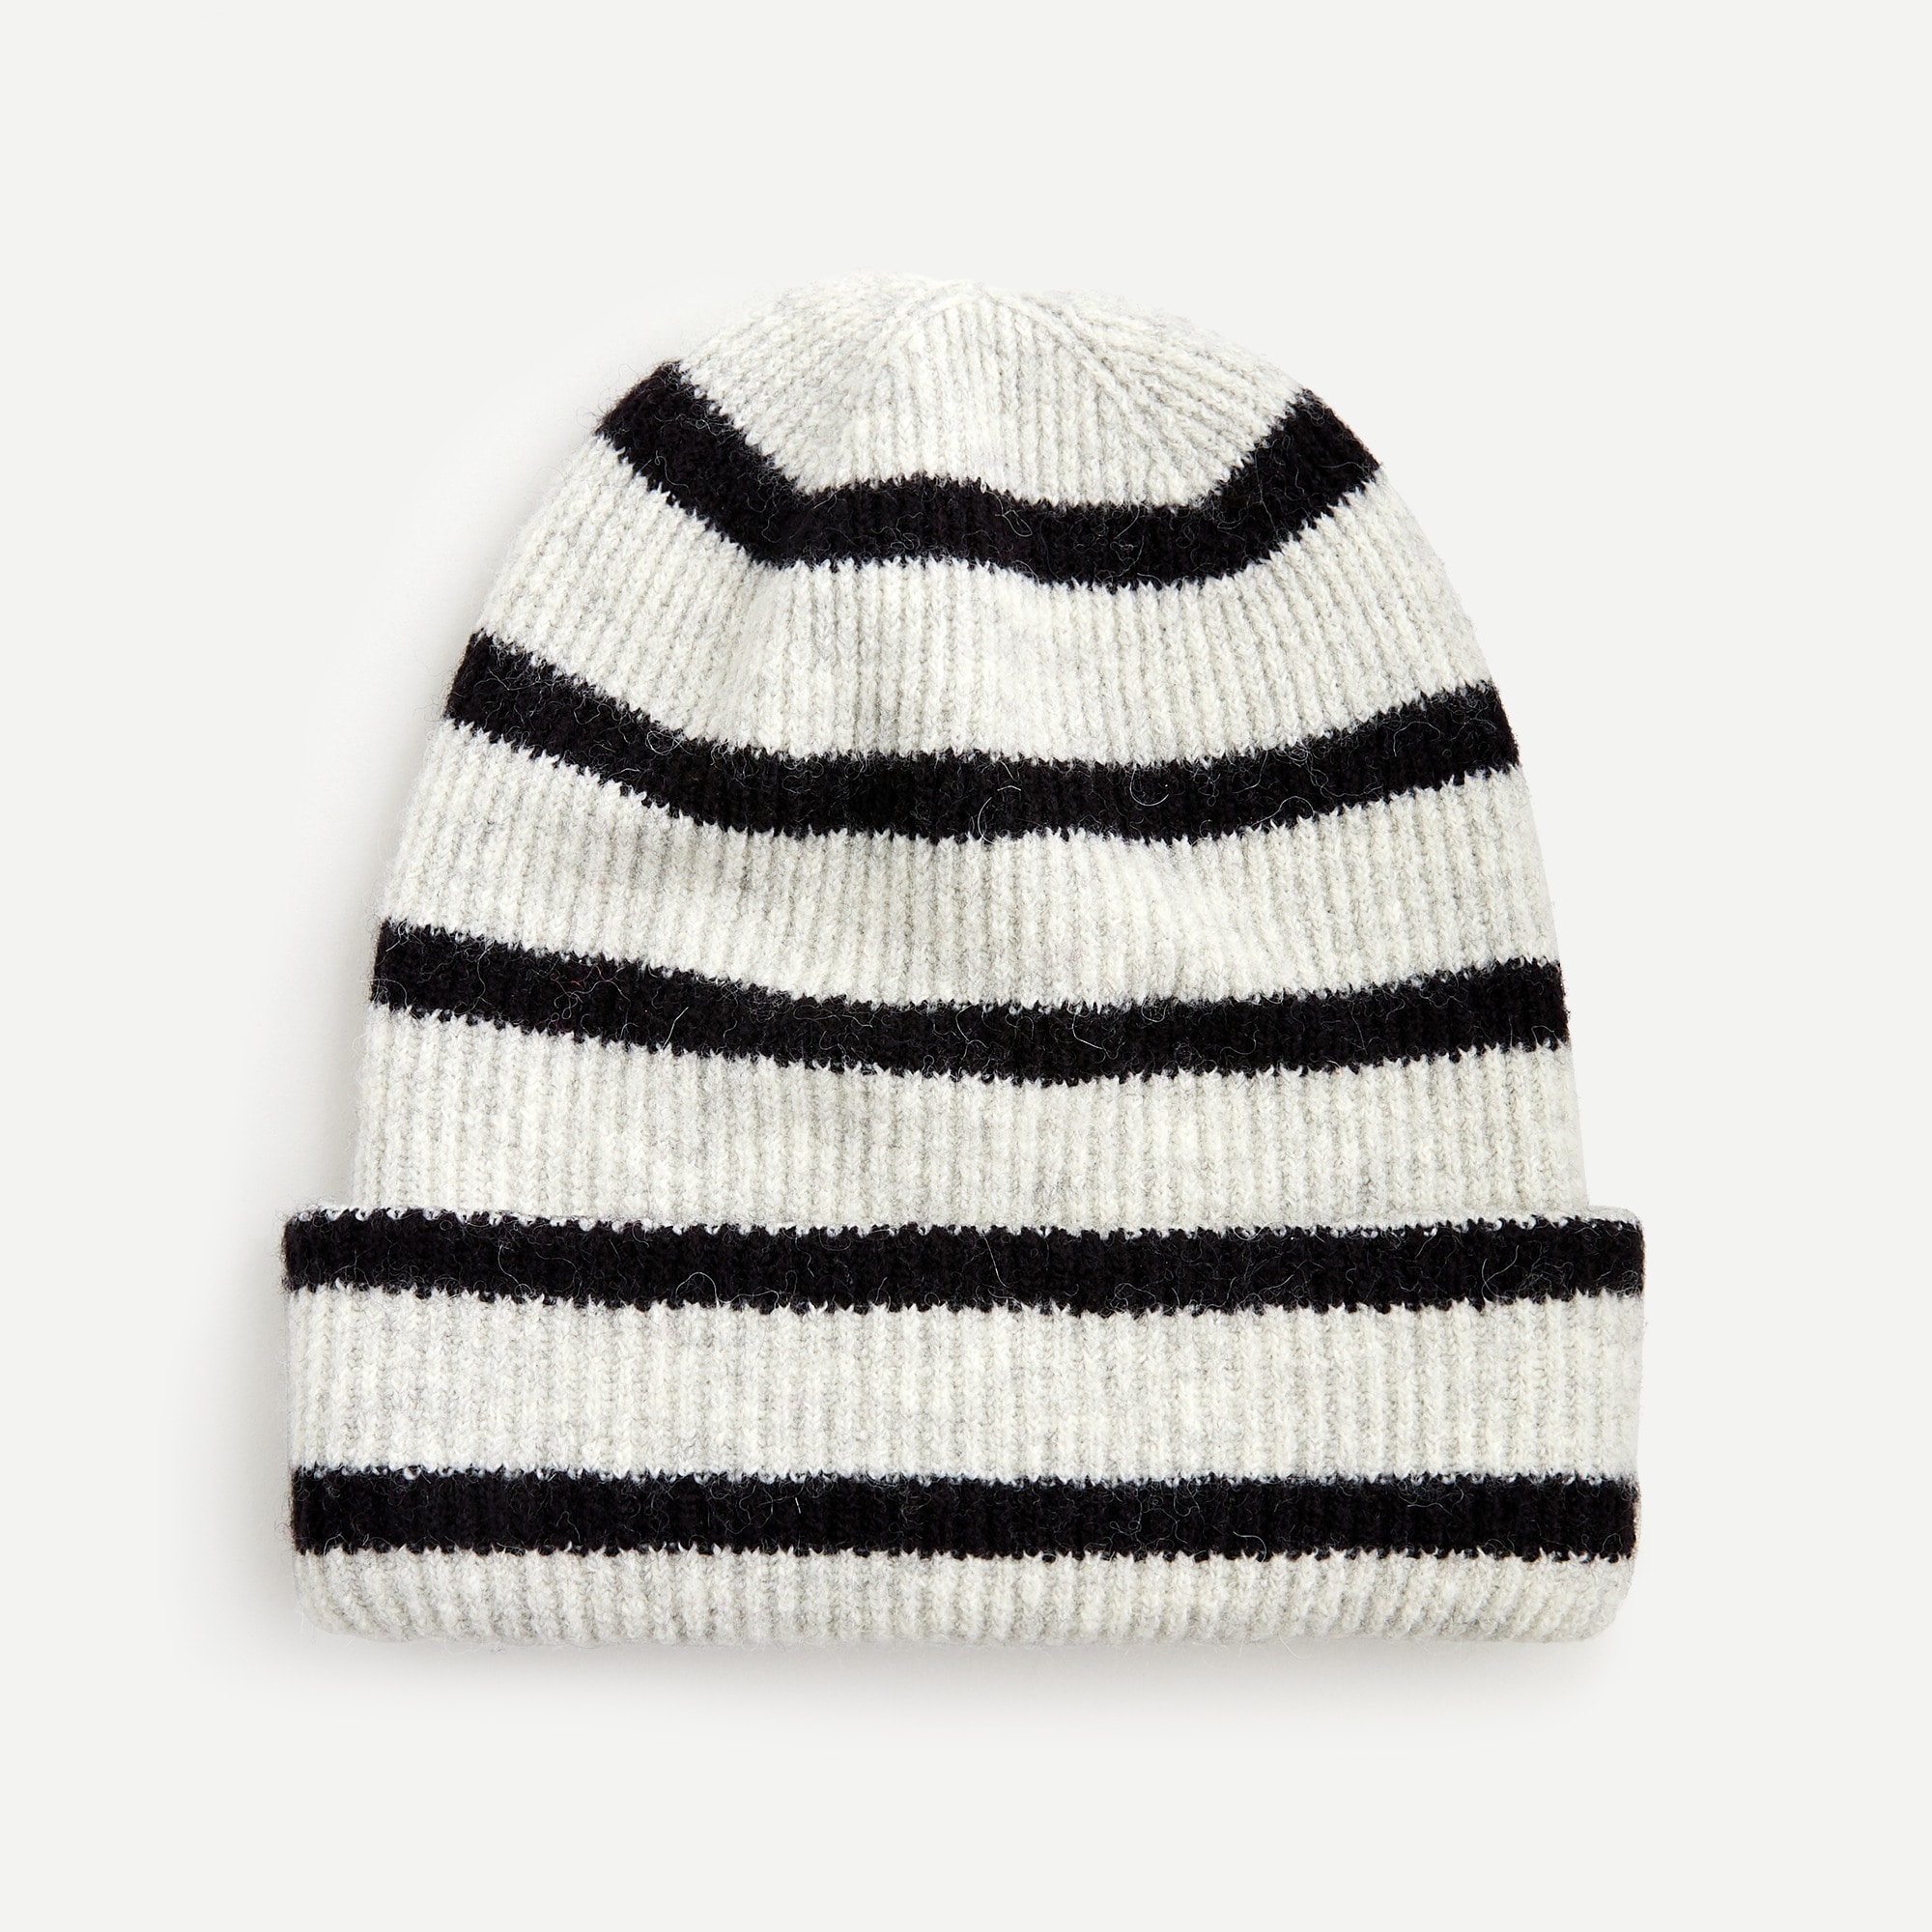 J.Crew: Ribbed Beanie In Supersoft Yarn For Women